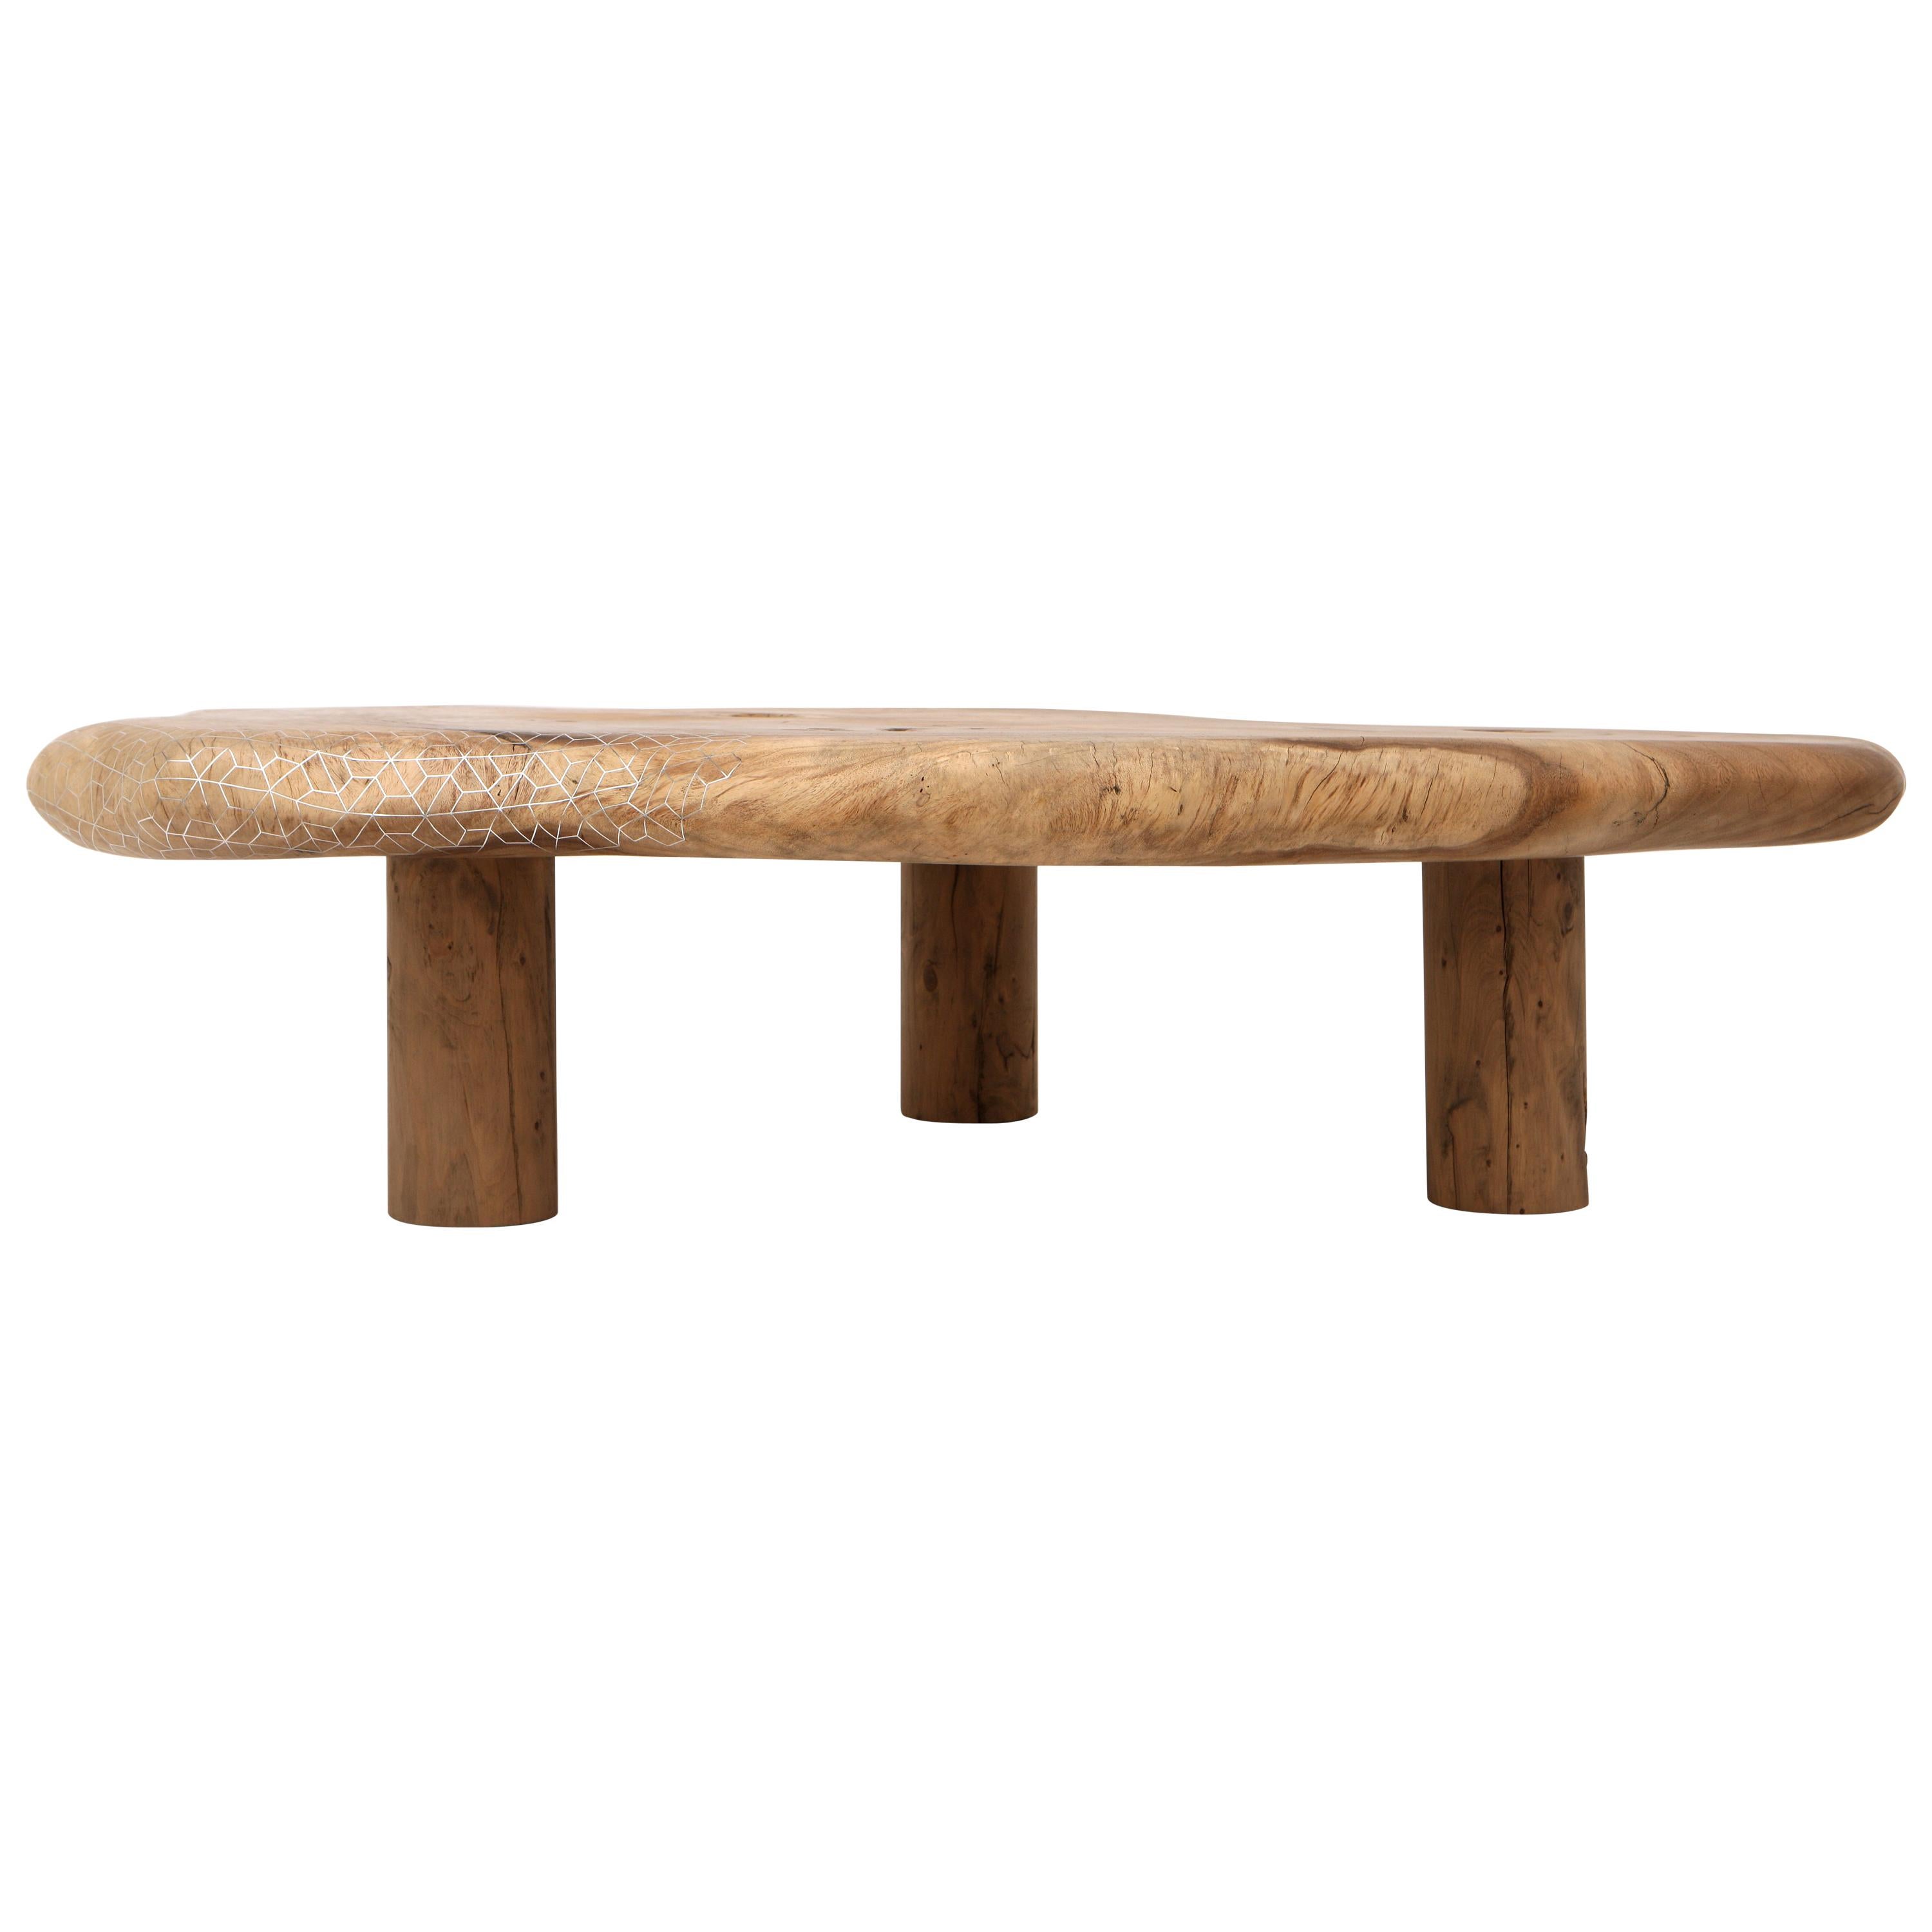 Natural Coordinates low table in Acacia wood - Unique piece im Angebot